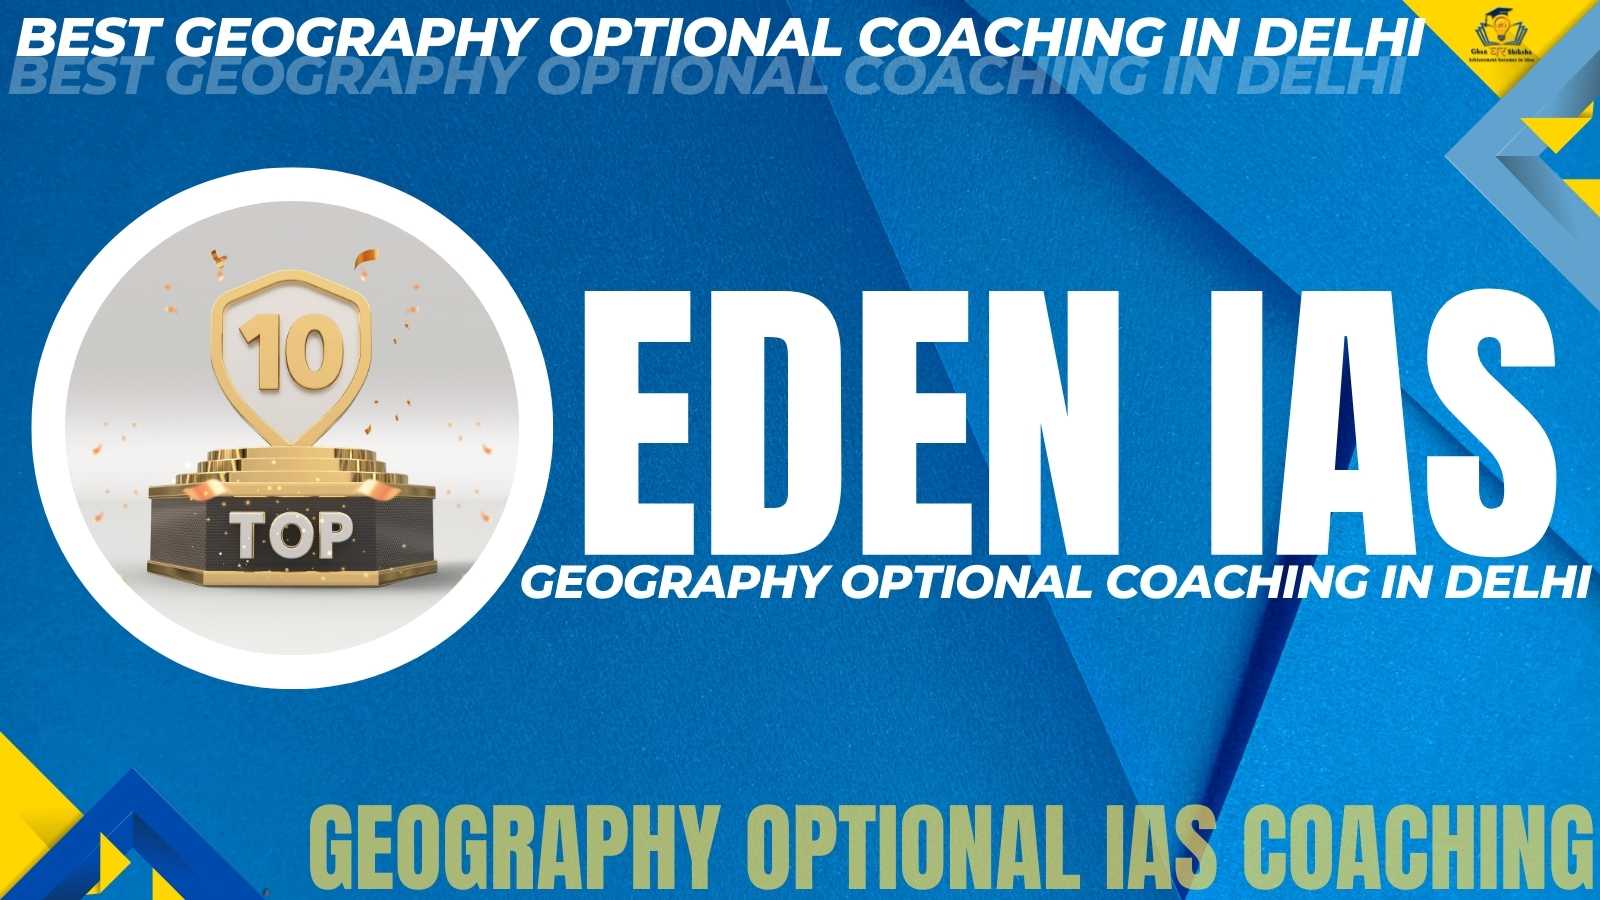 Best Geography Optional Coaching In Delhi